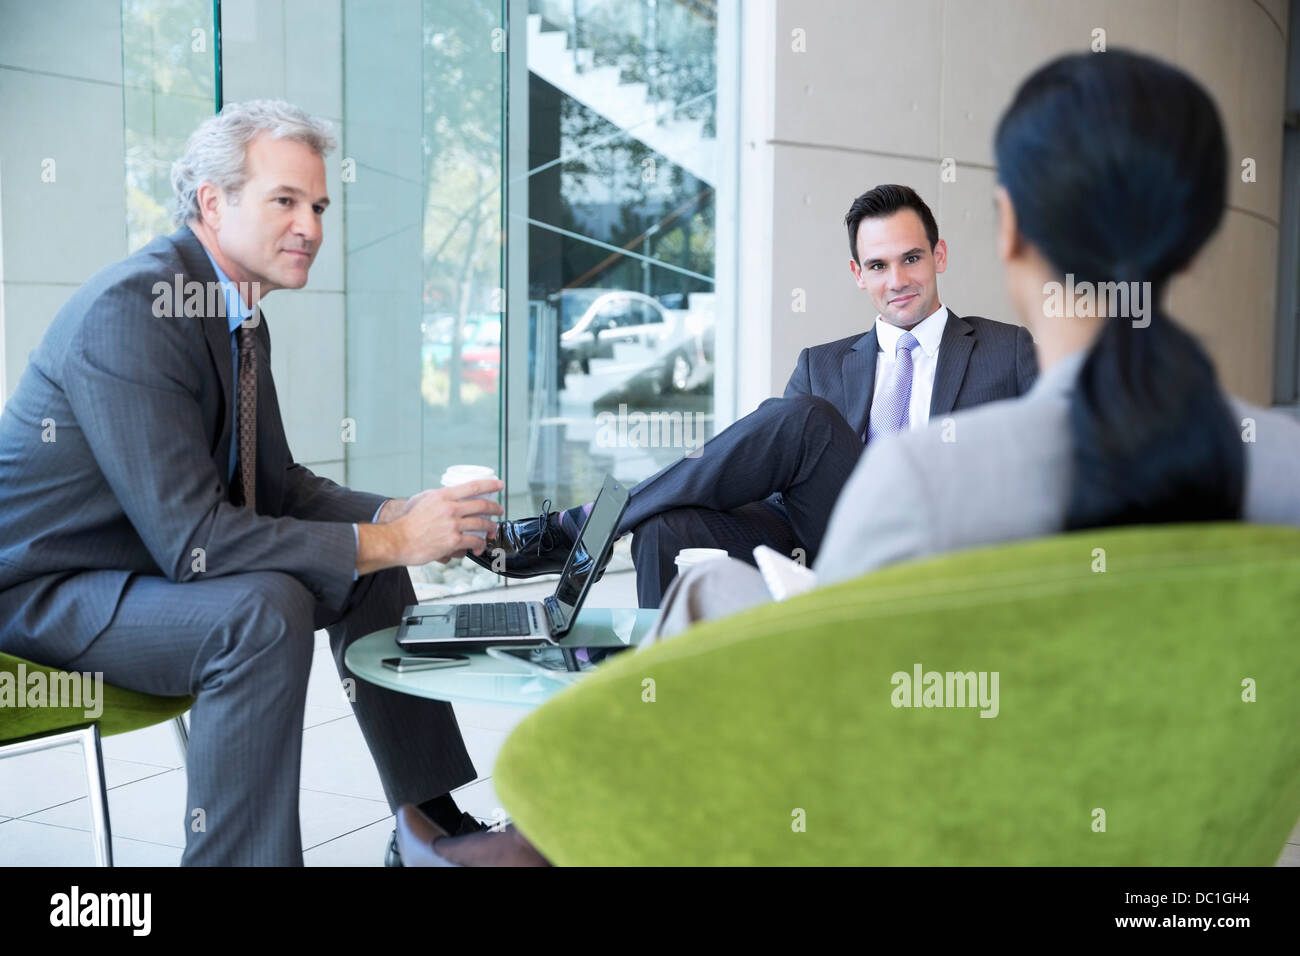 Business people meeting in lobby Stock Photo